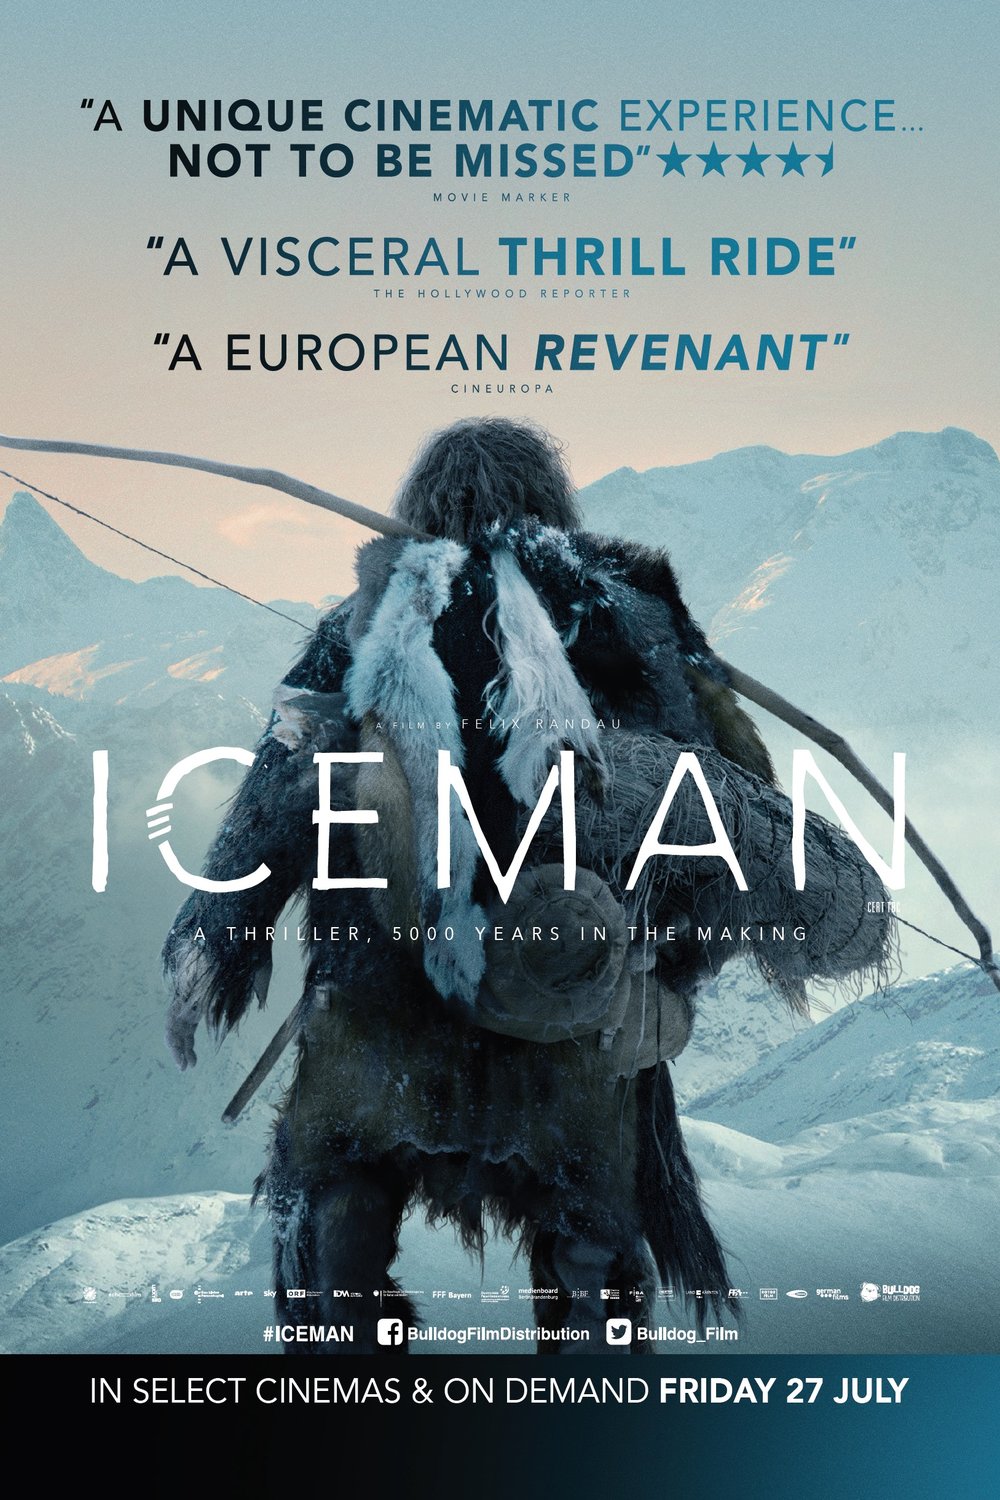 Poster of the movie Iceman